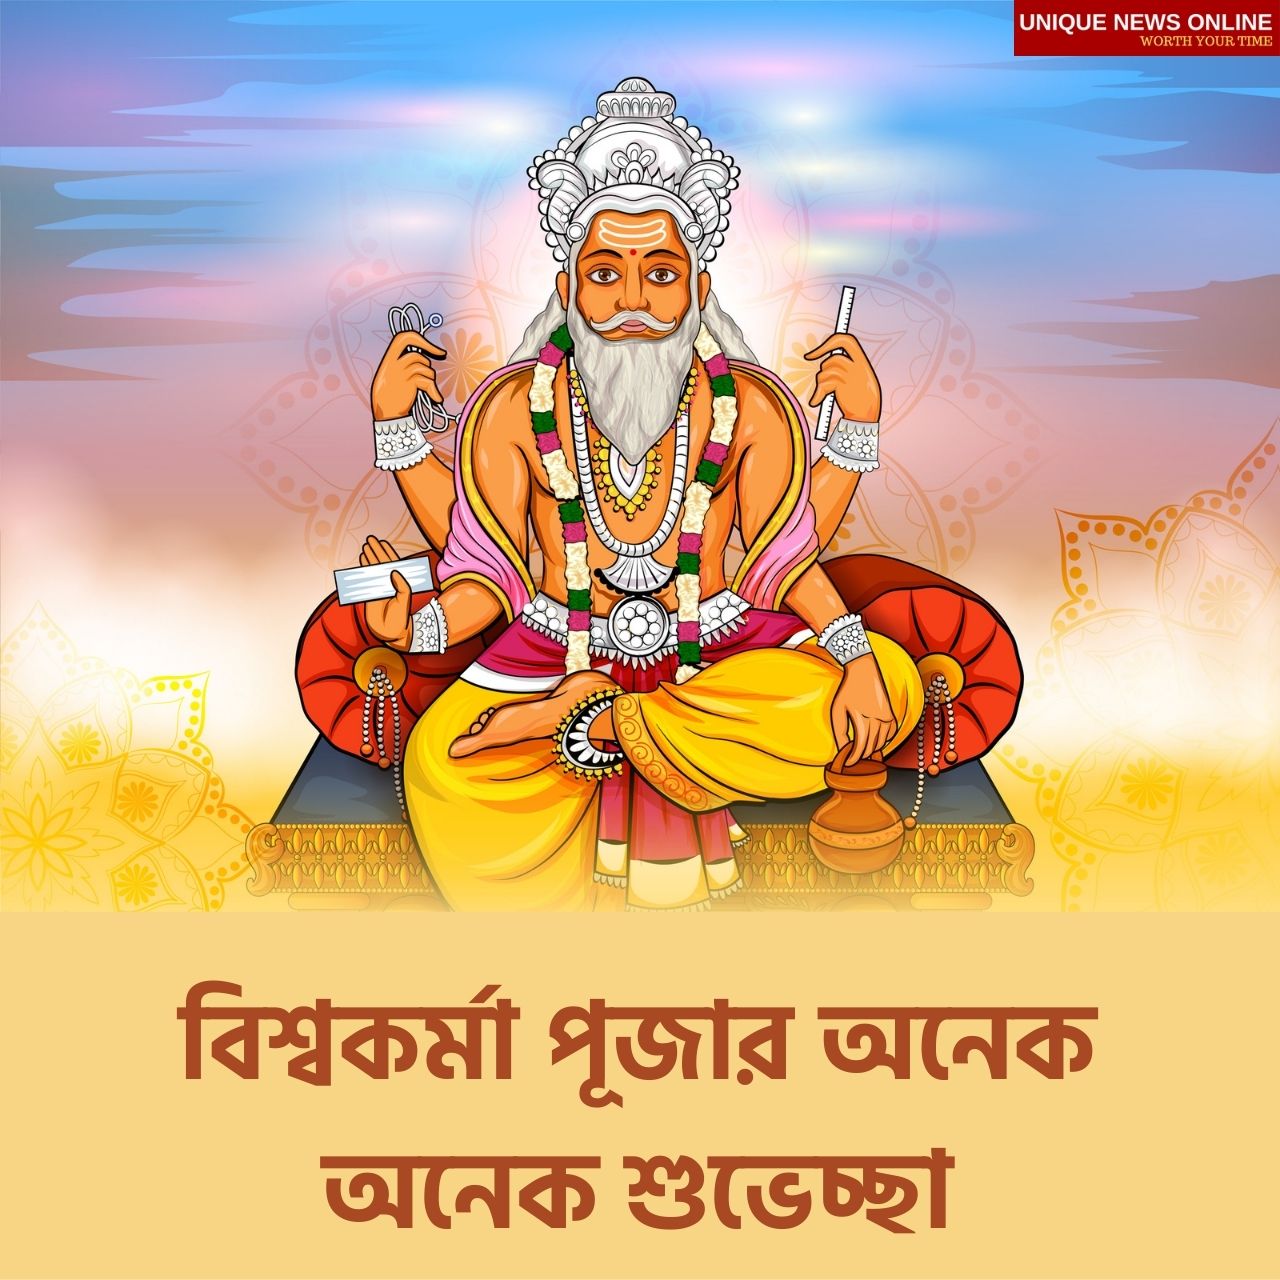 Vishwakarma Puja 2021 Bengali Wishes, Images, Quotes, Messages, Greetings, and Images to share